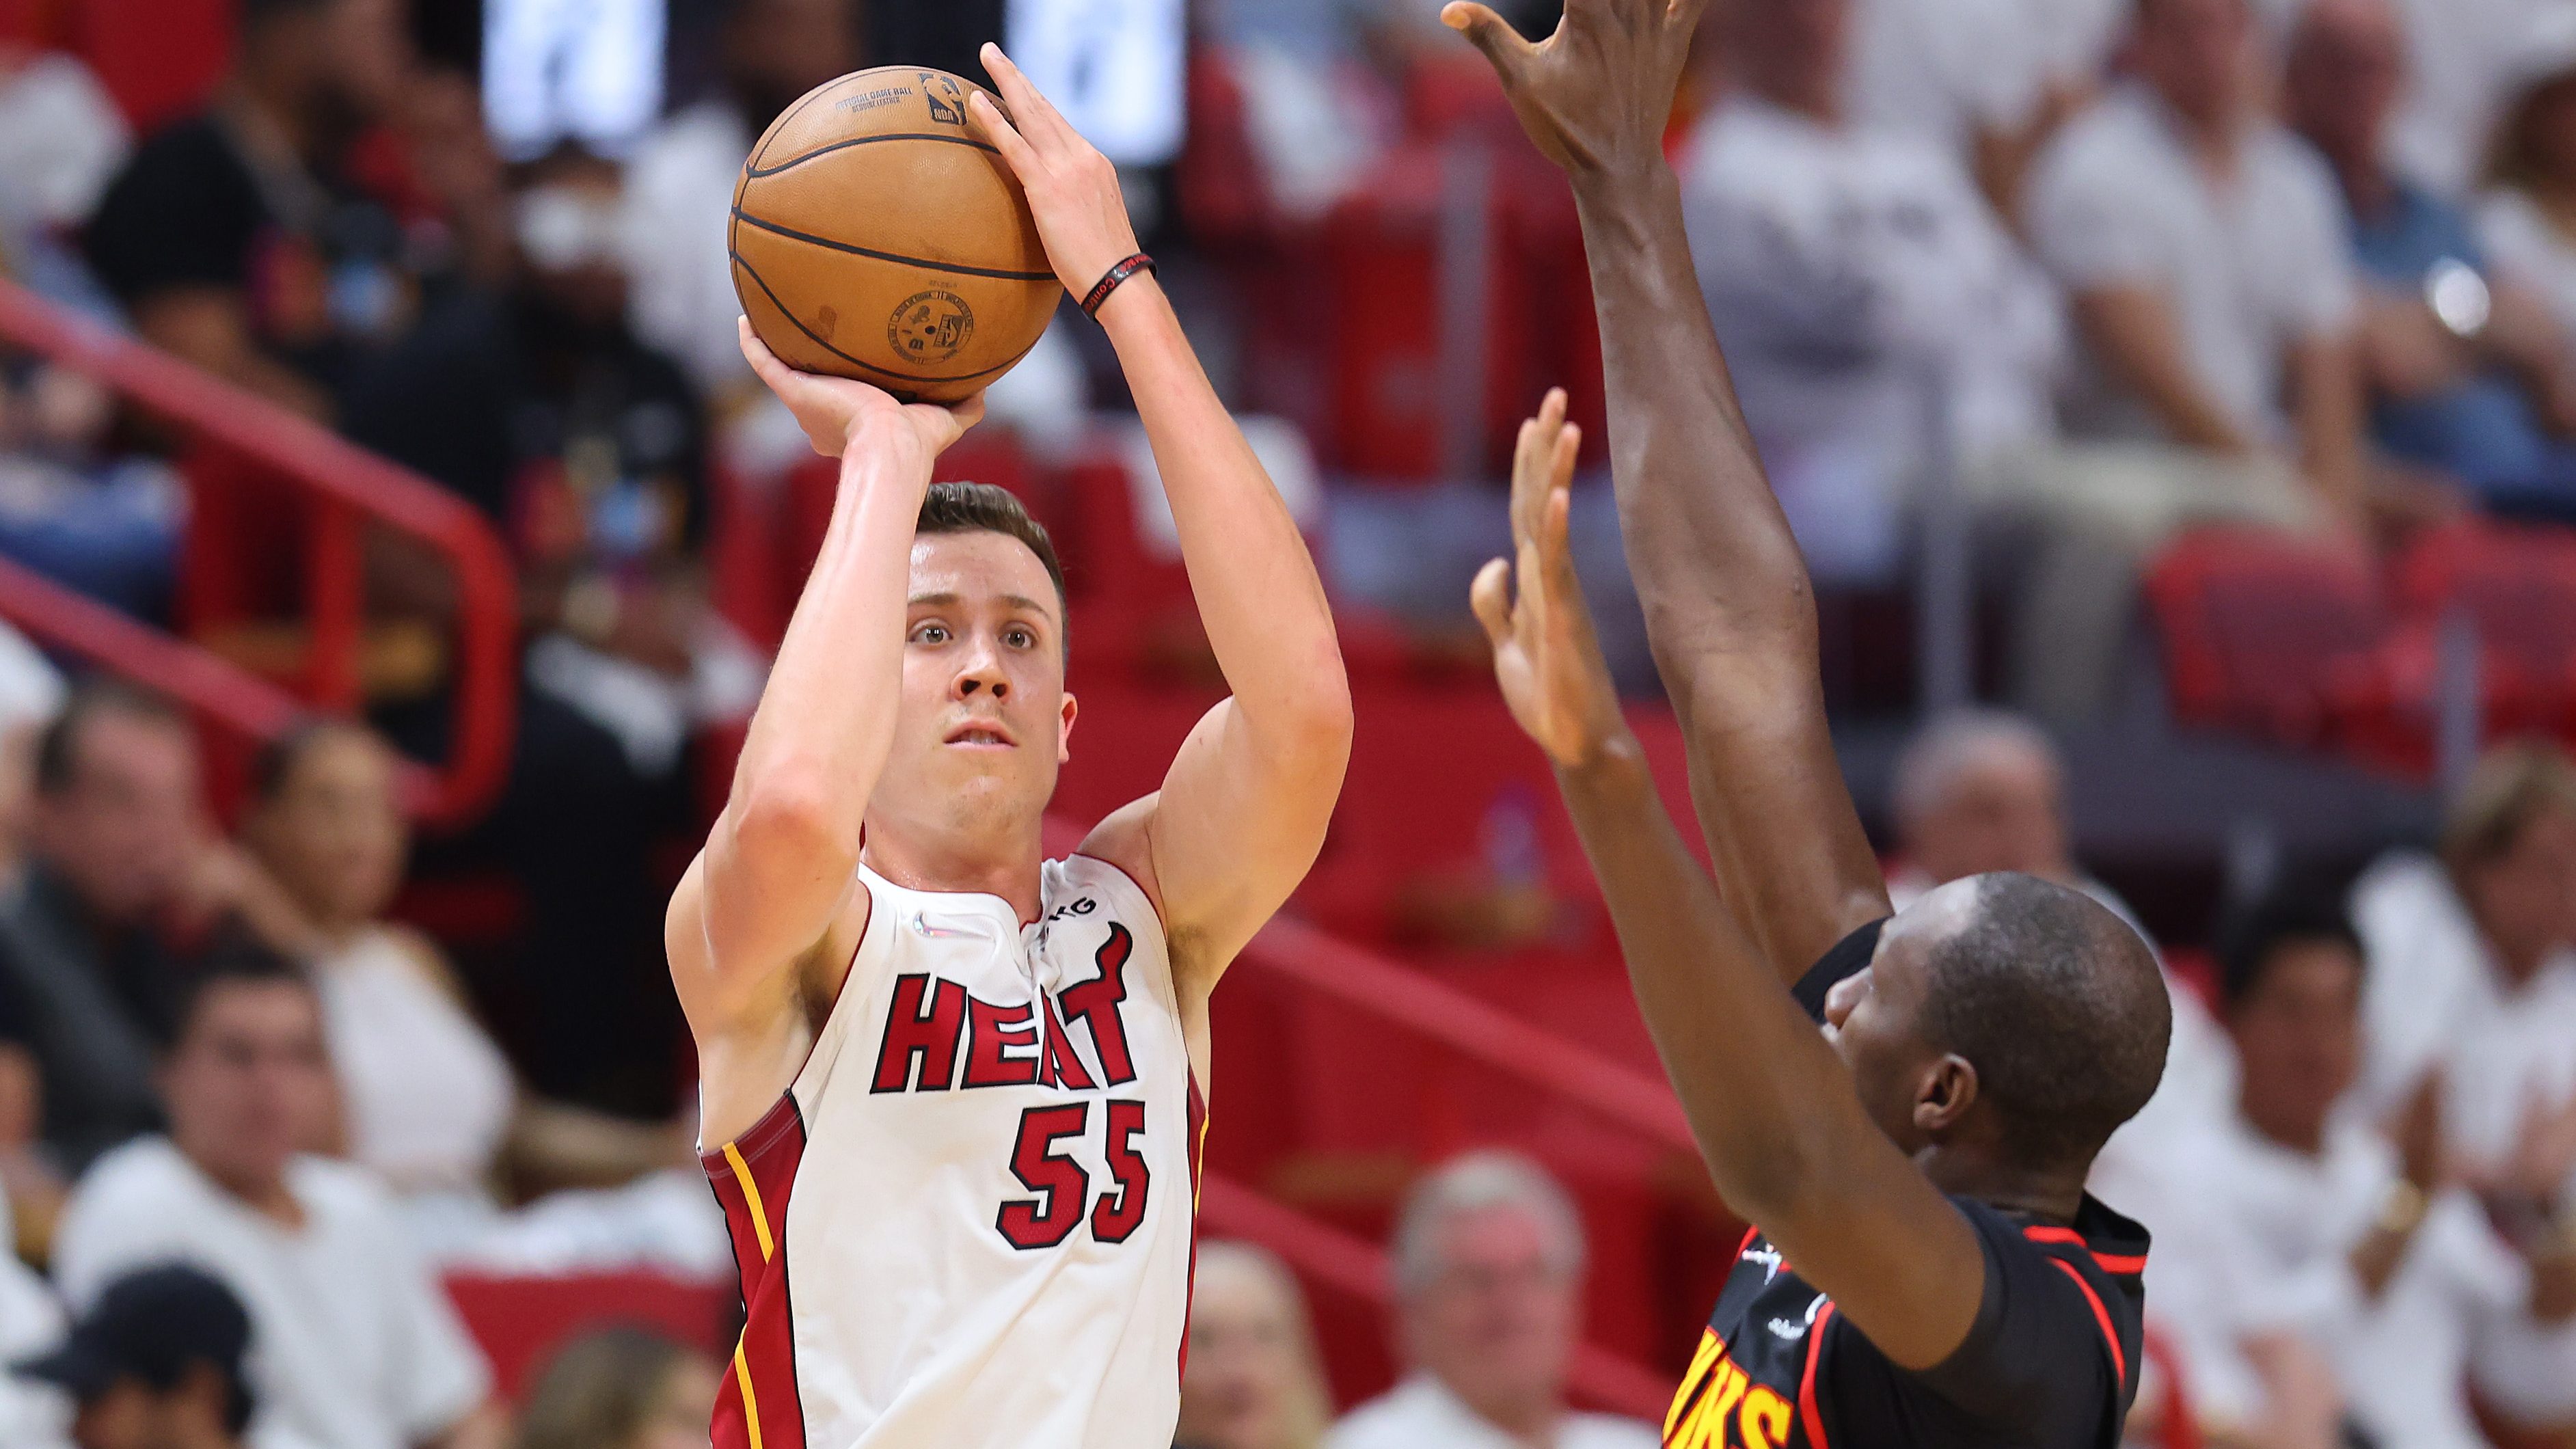 DUNCAN ROBINSON, WHATS YOUR OPINION ON HIM WITH THE TEAM AND FREE